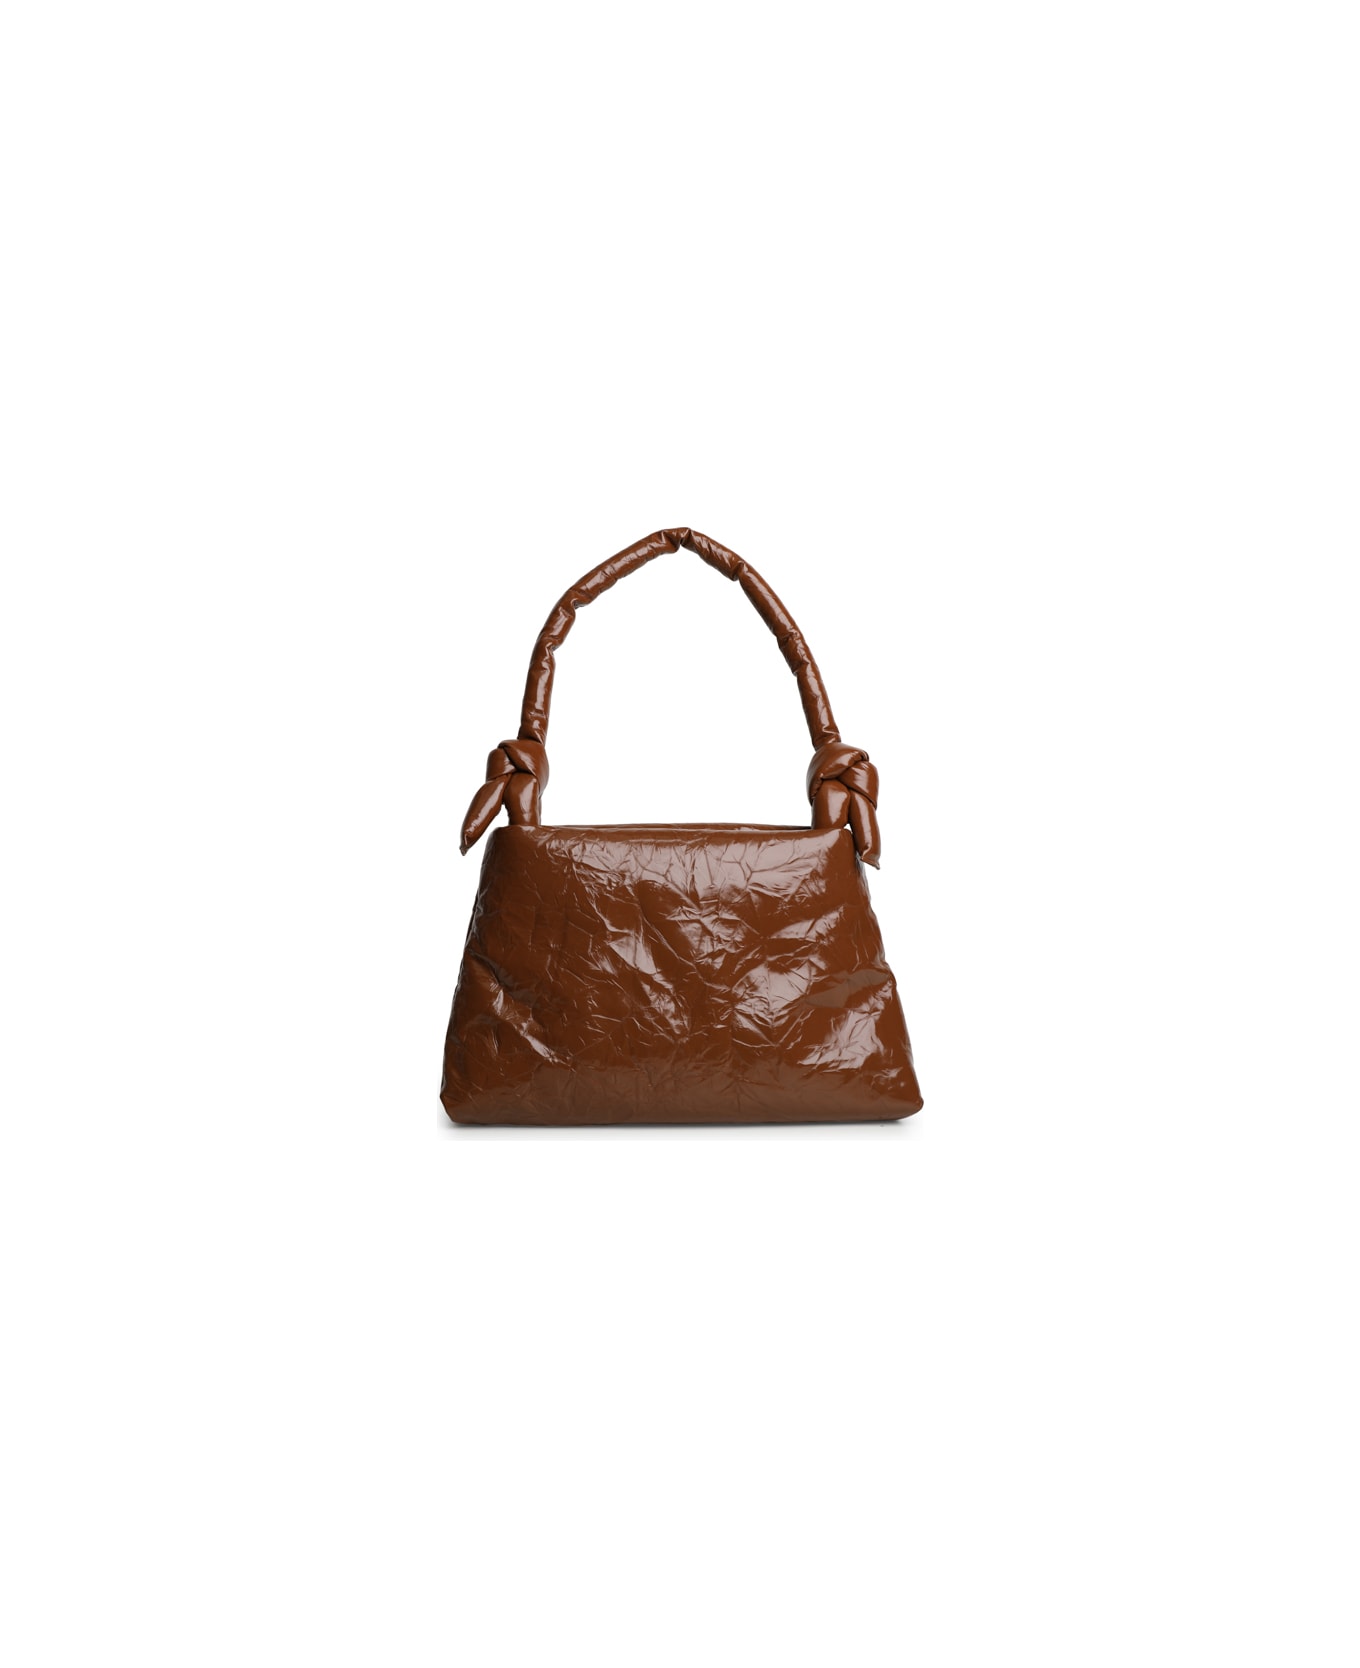 KASSL Editions Lady Bag With Side Knots - Cognac